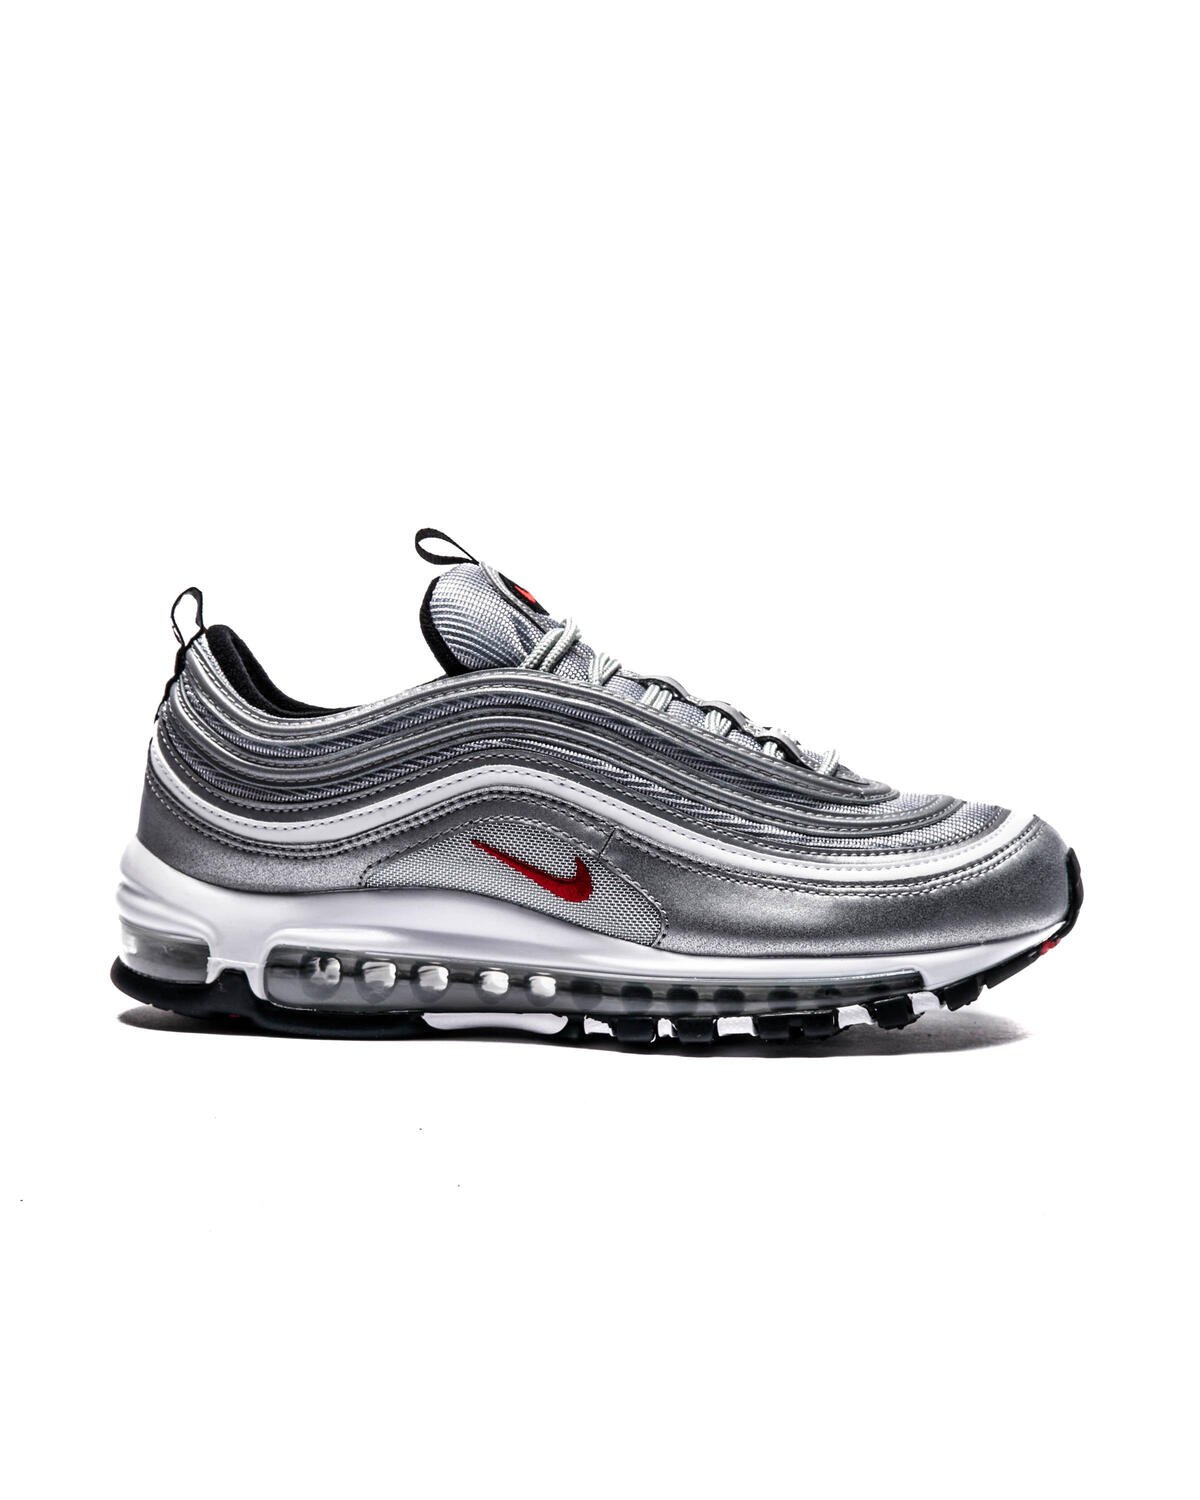 Nike Men's Air Max 97 Casual Shoes in Black/Black Size 9.0